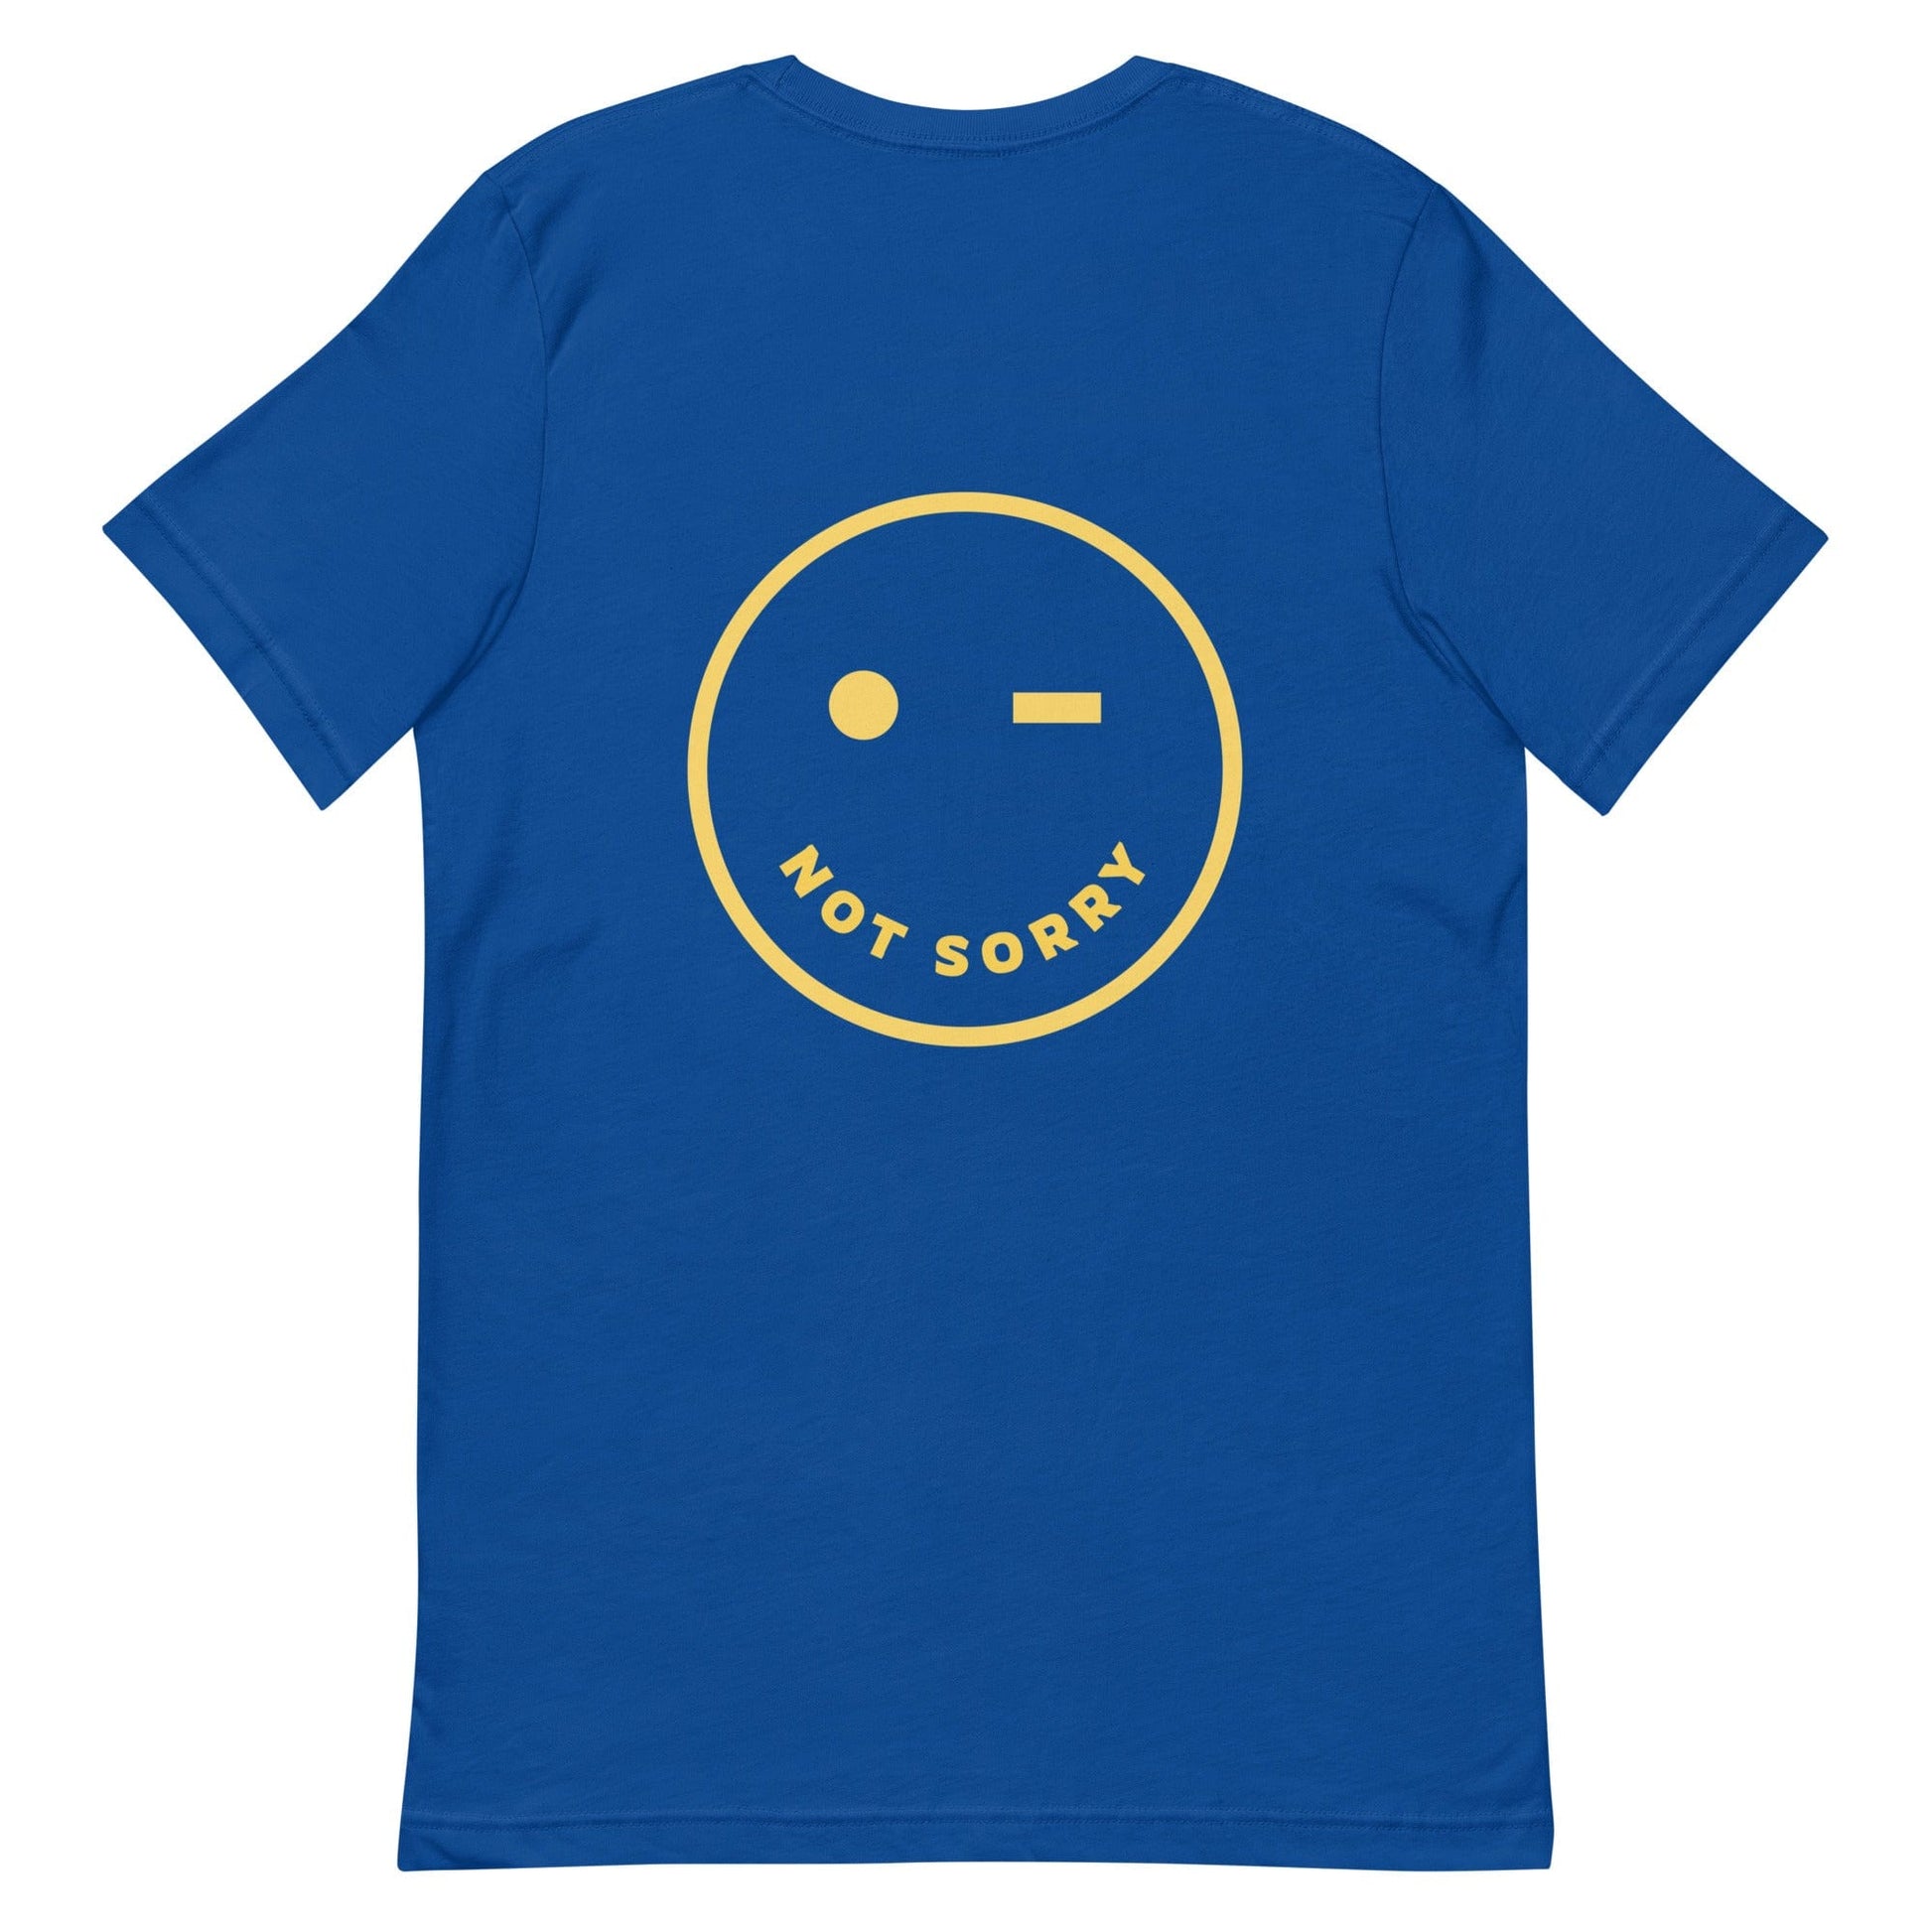 genderless-sorry-not-sorry-tshirt-quote-apparel-blue-and-yellow-at-feminist-define